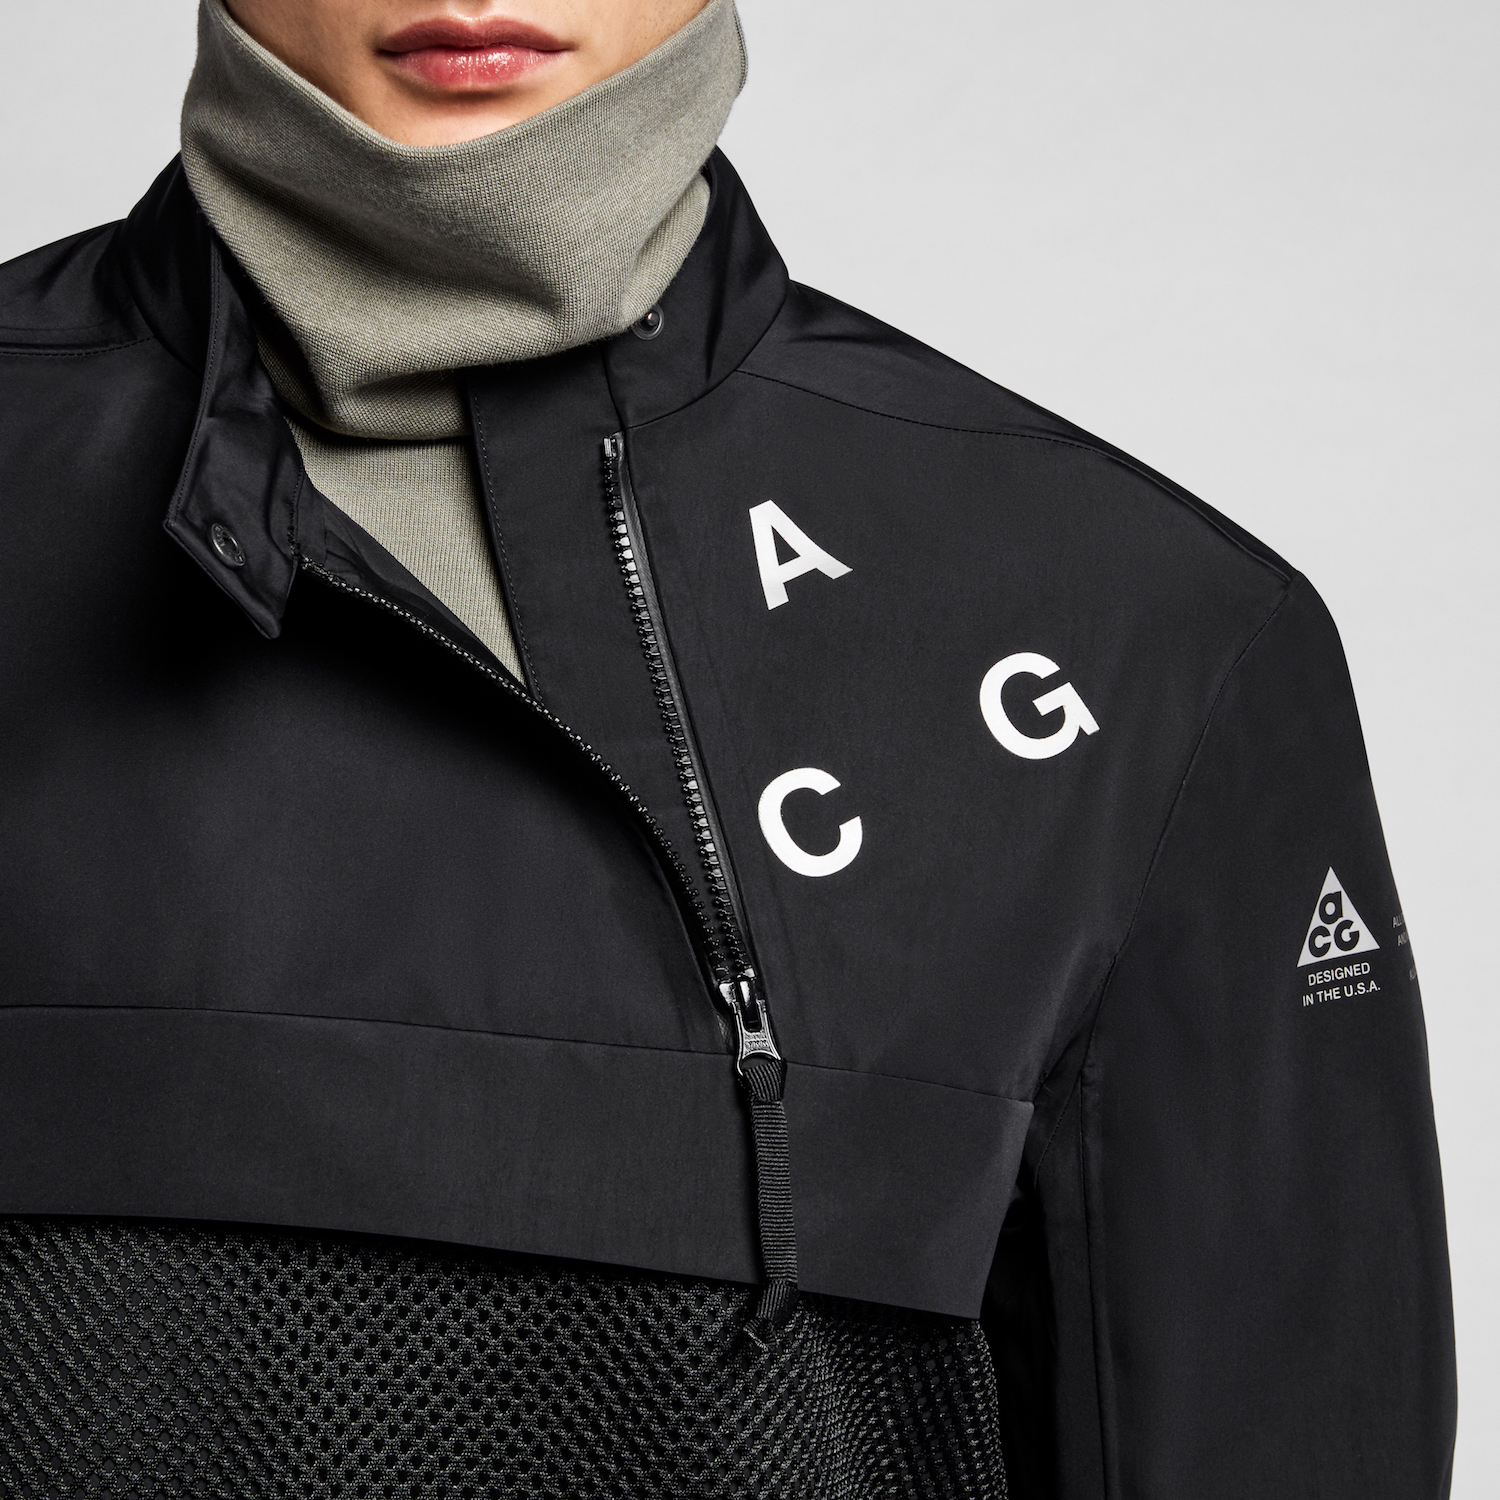 acg collection